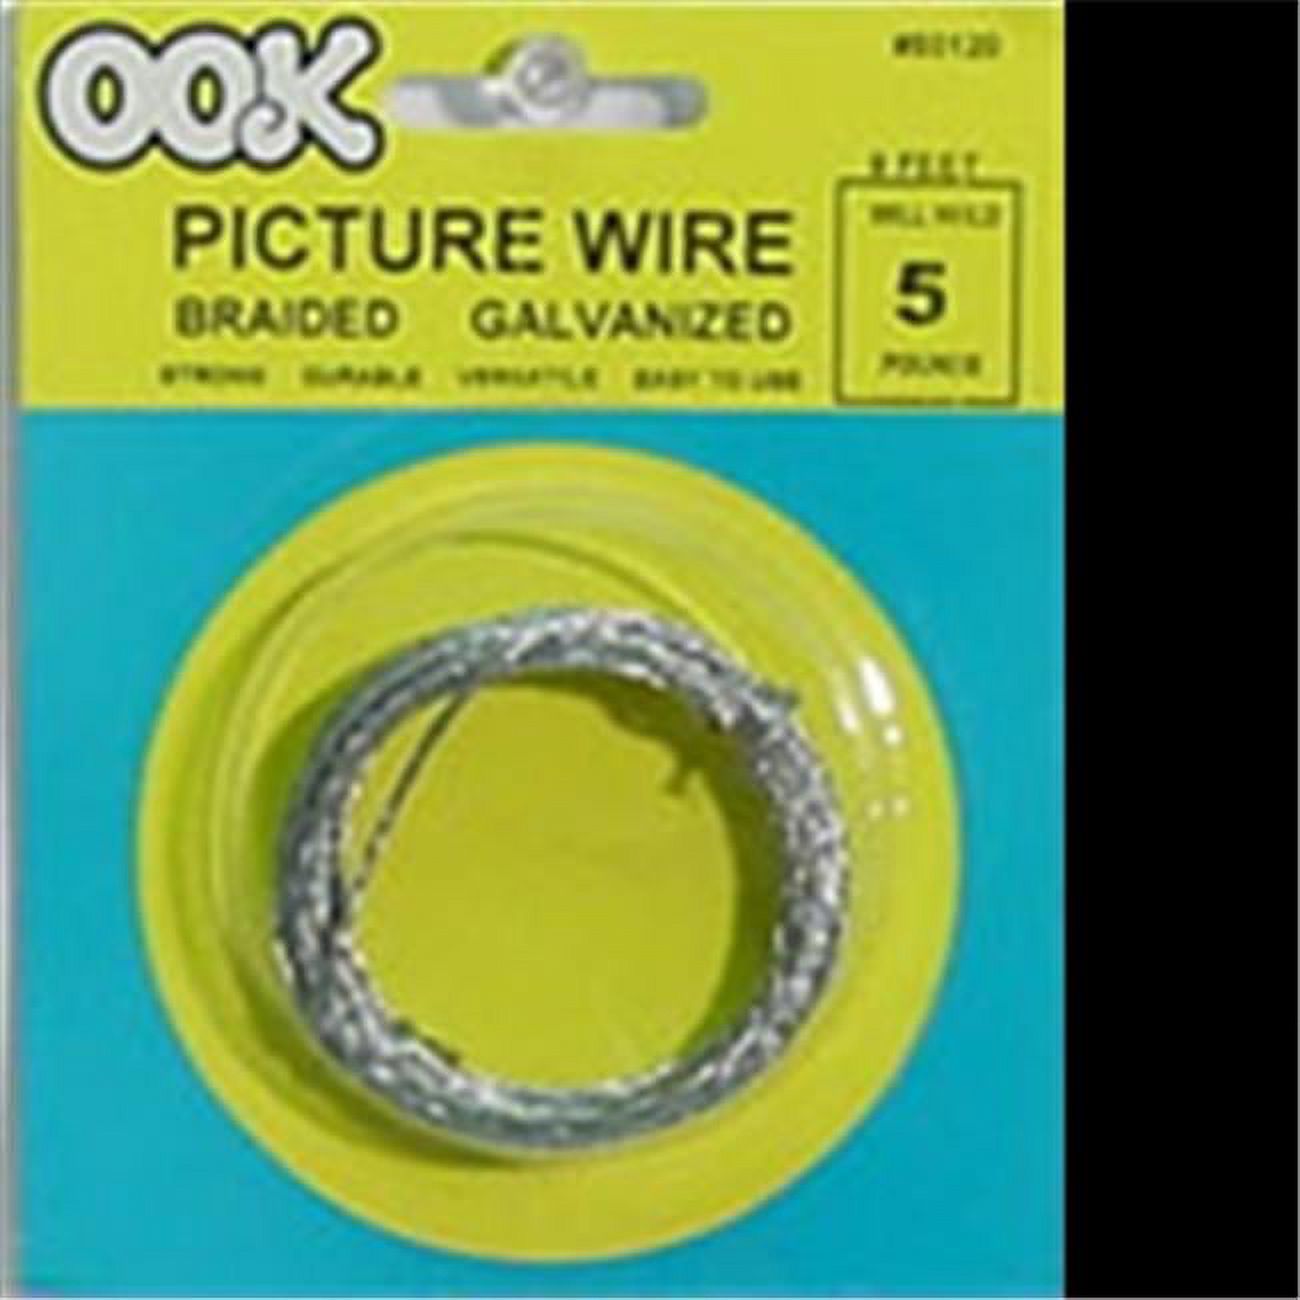 Impex Systems Group 50123 30 lbs. Ook Braided Picture Wire   Pack of 12 - image 1 of 3